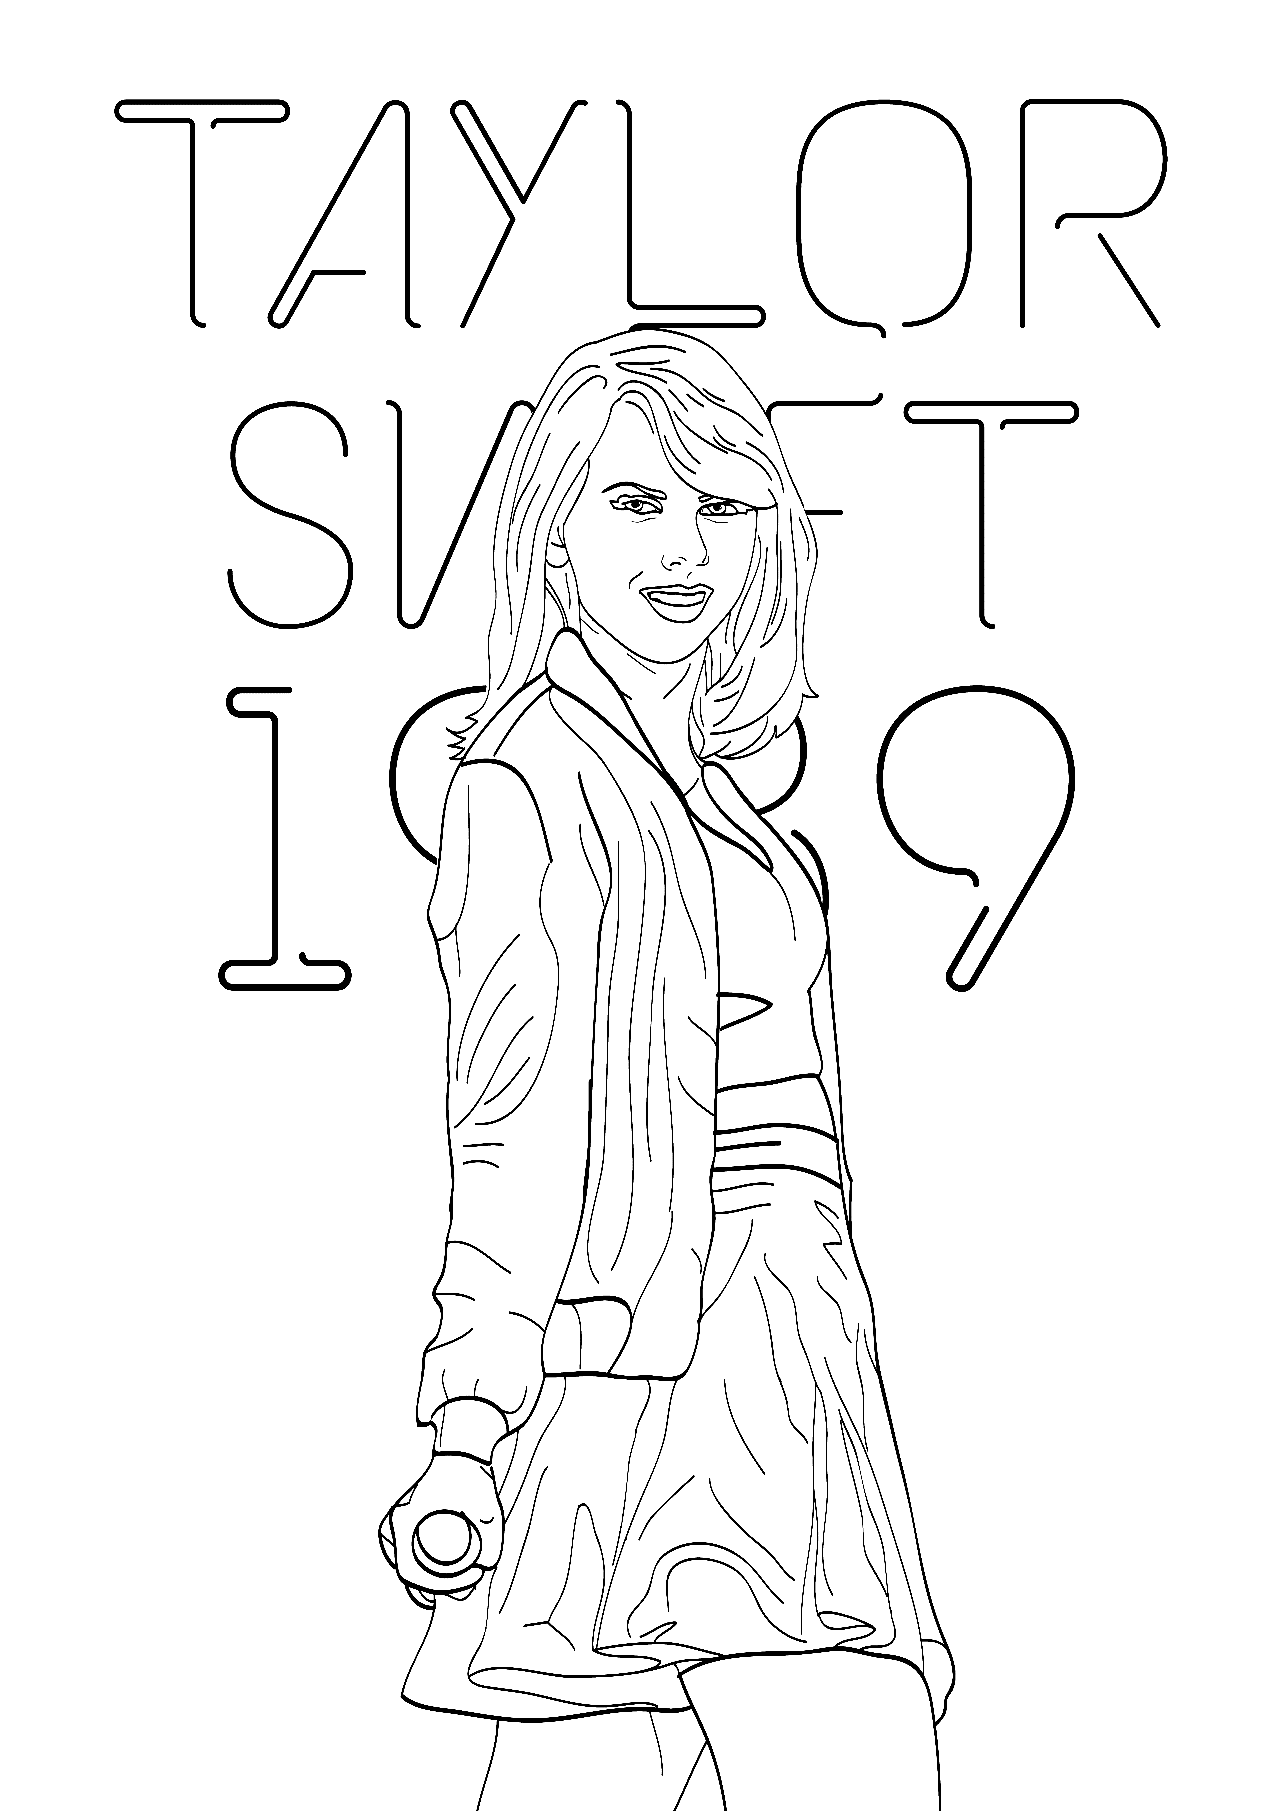 Taylor Swift Coloring Page folklore 